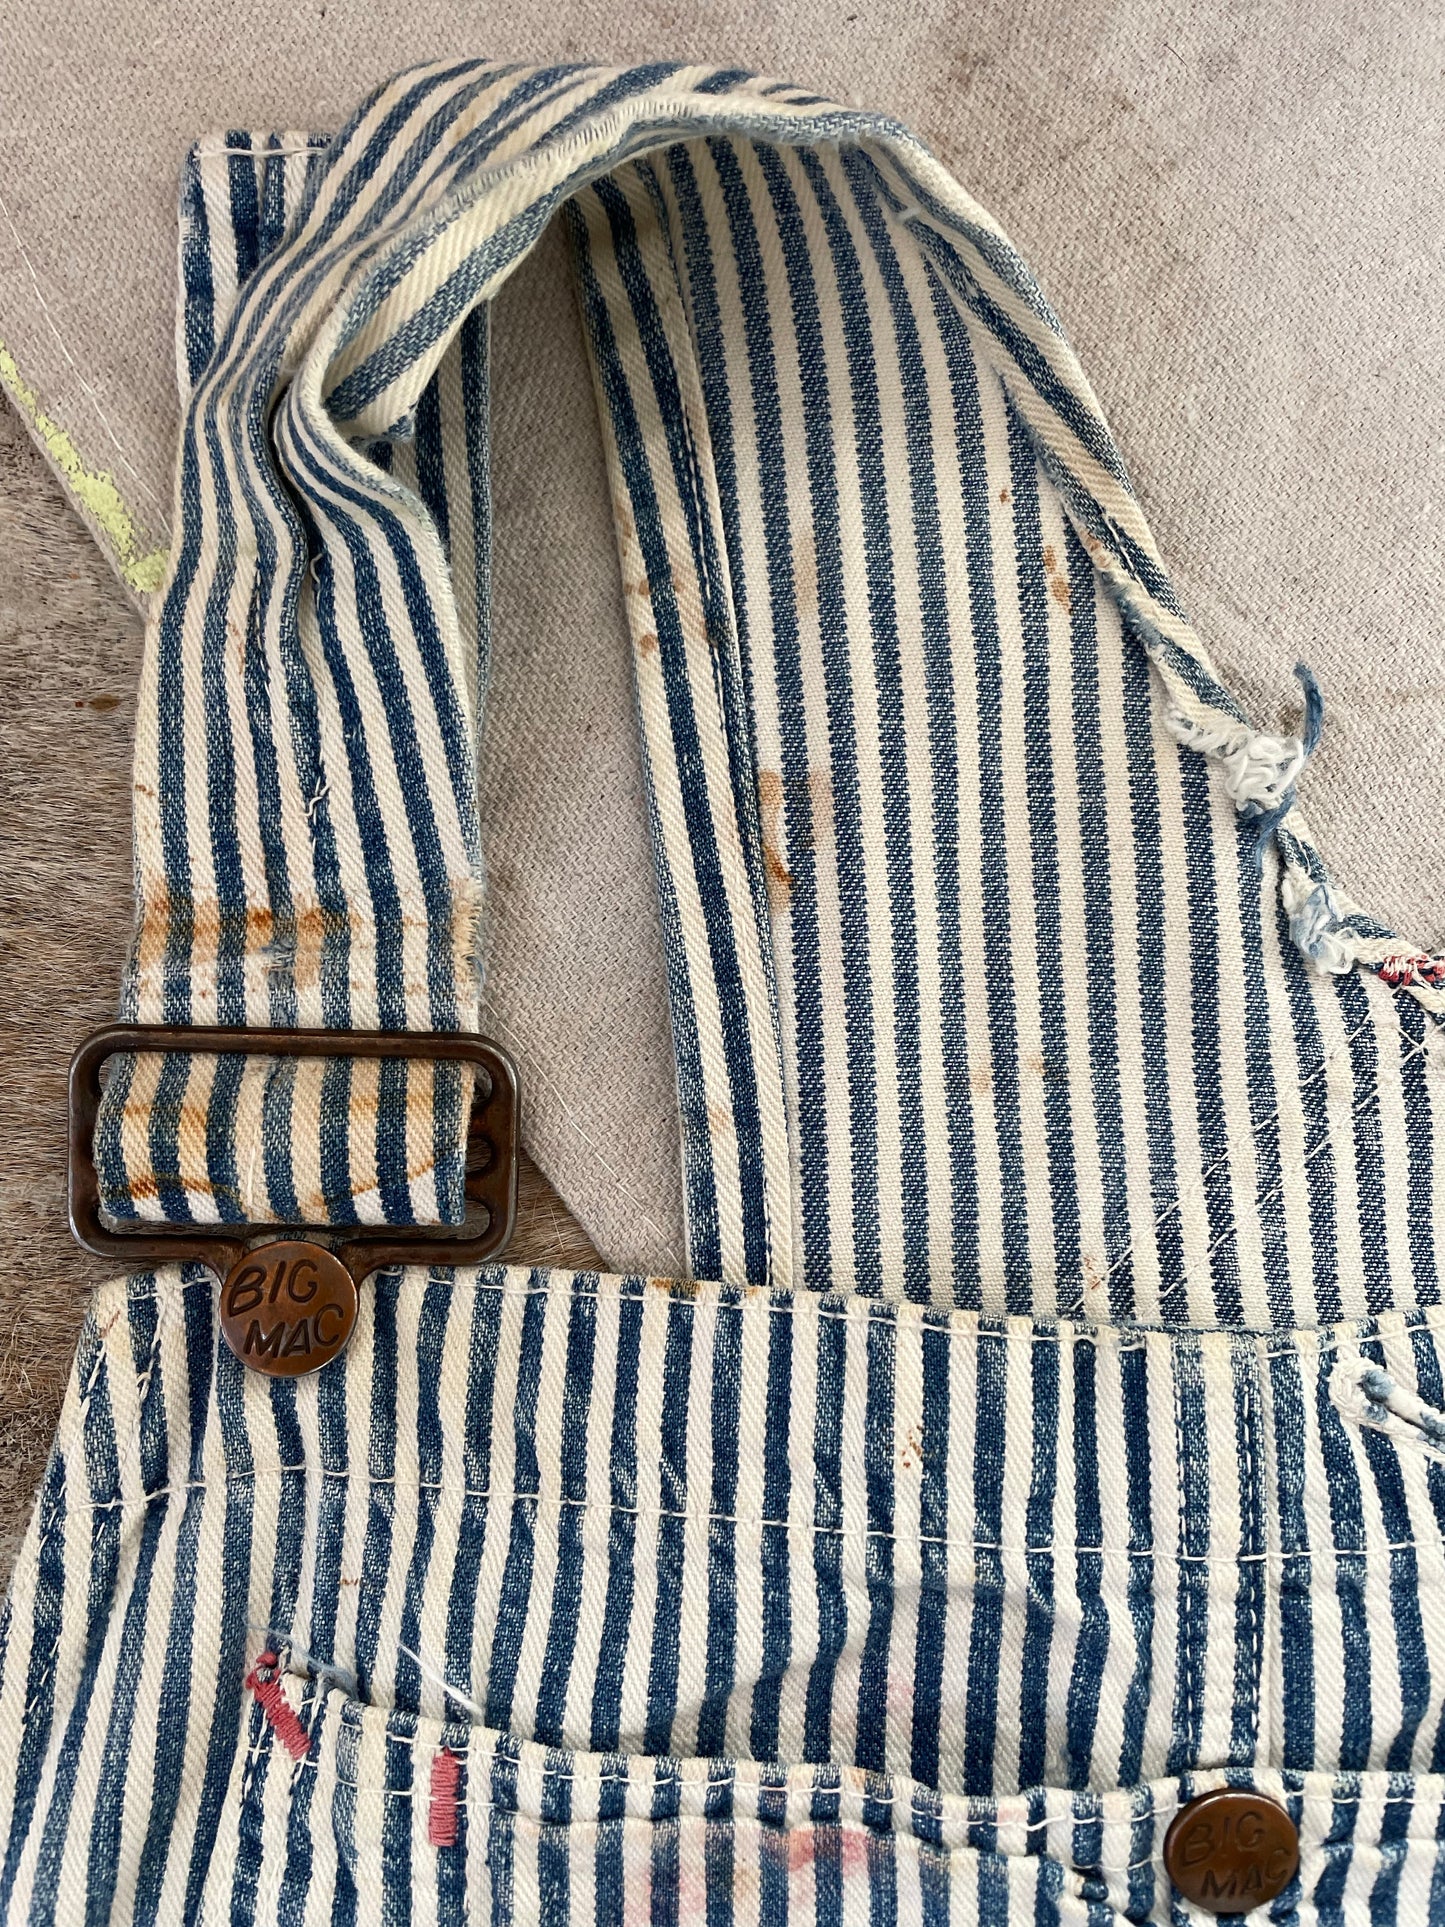 60s Penney’s Big Mac Express Stripe Overalls